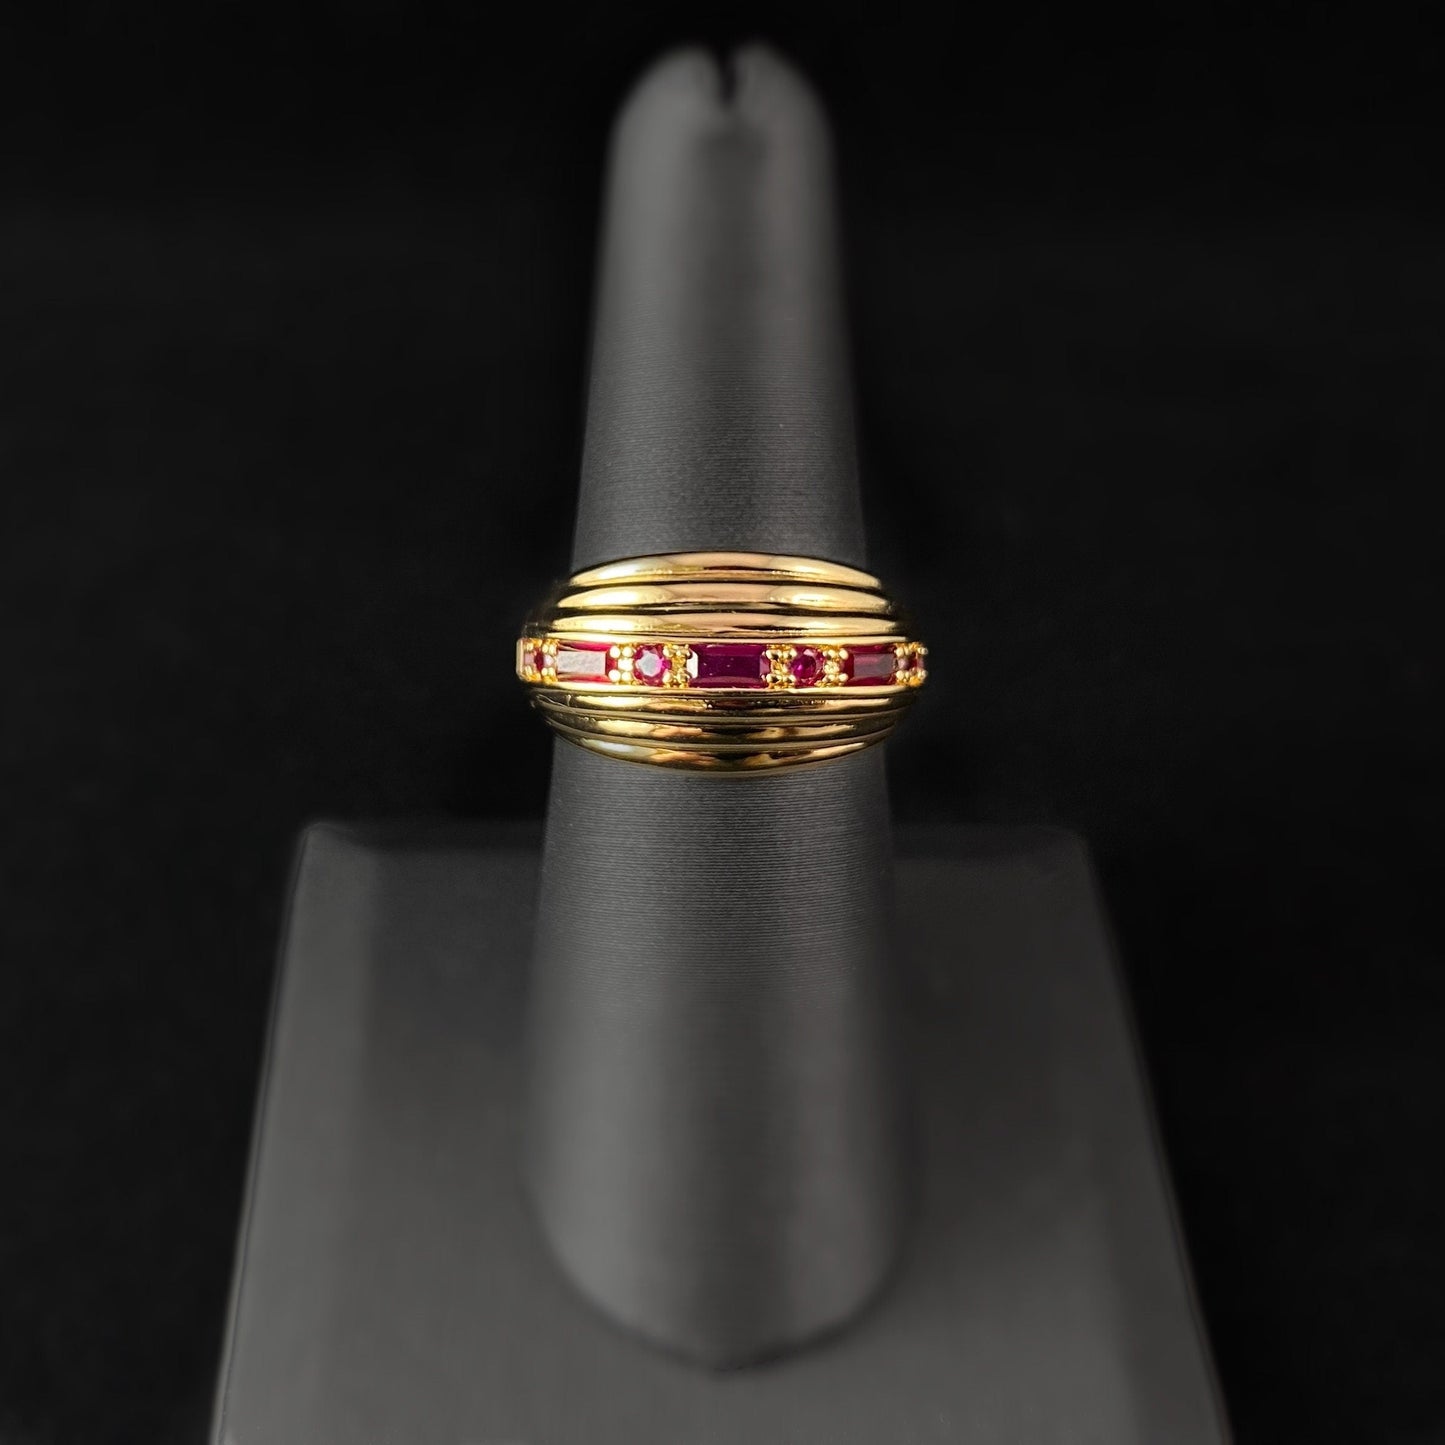 Chunky Gold Dome Ring with Ruby Red Stones - Inner Light, Size 7